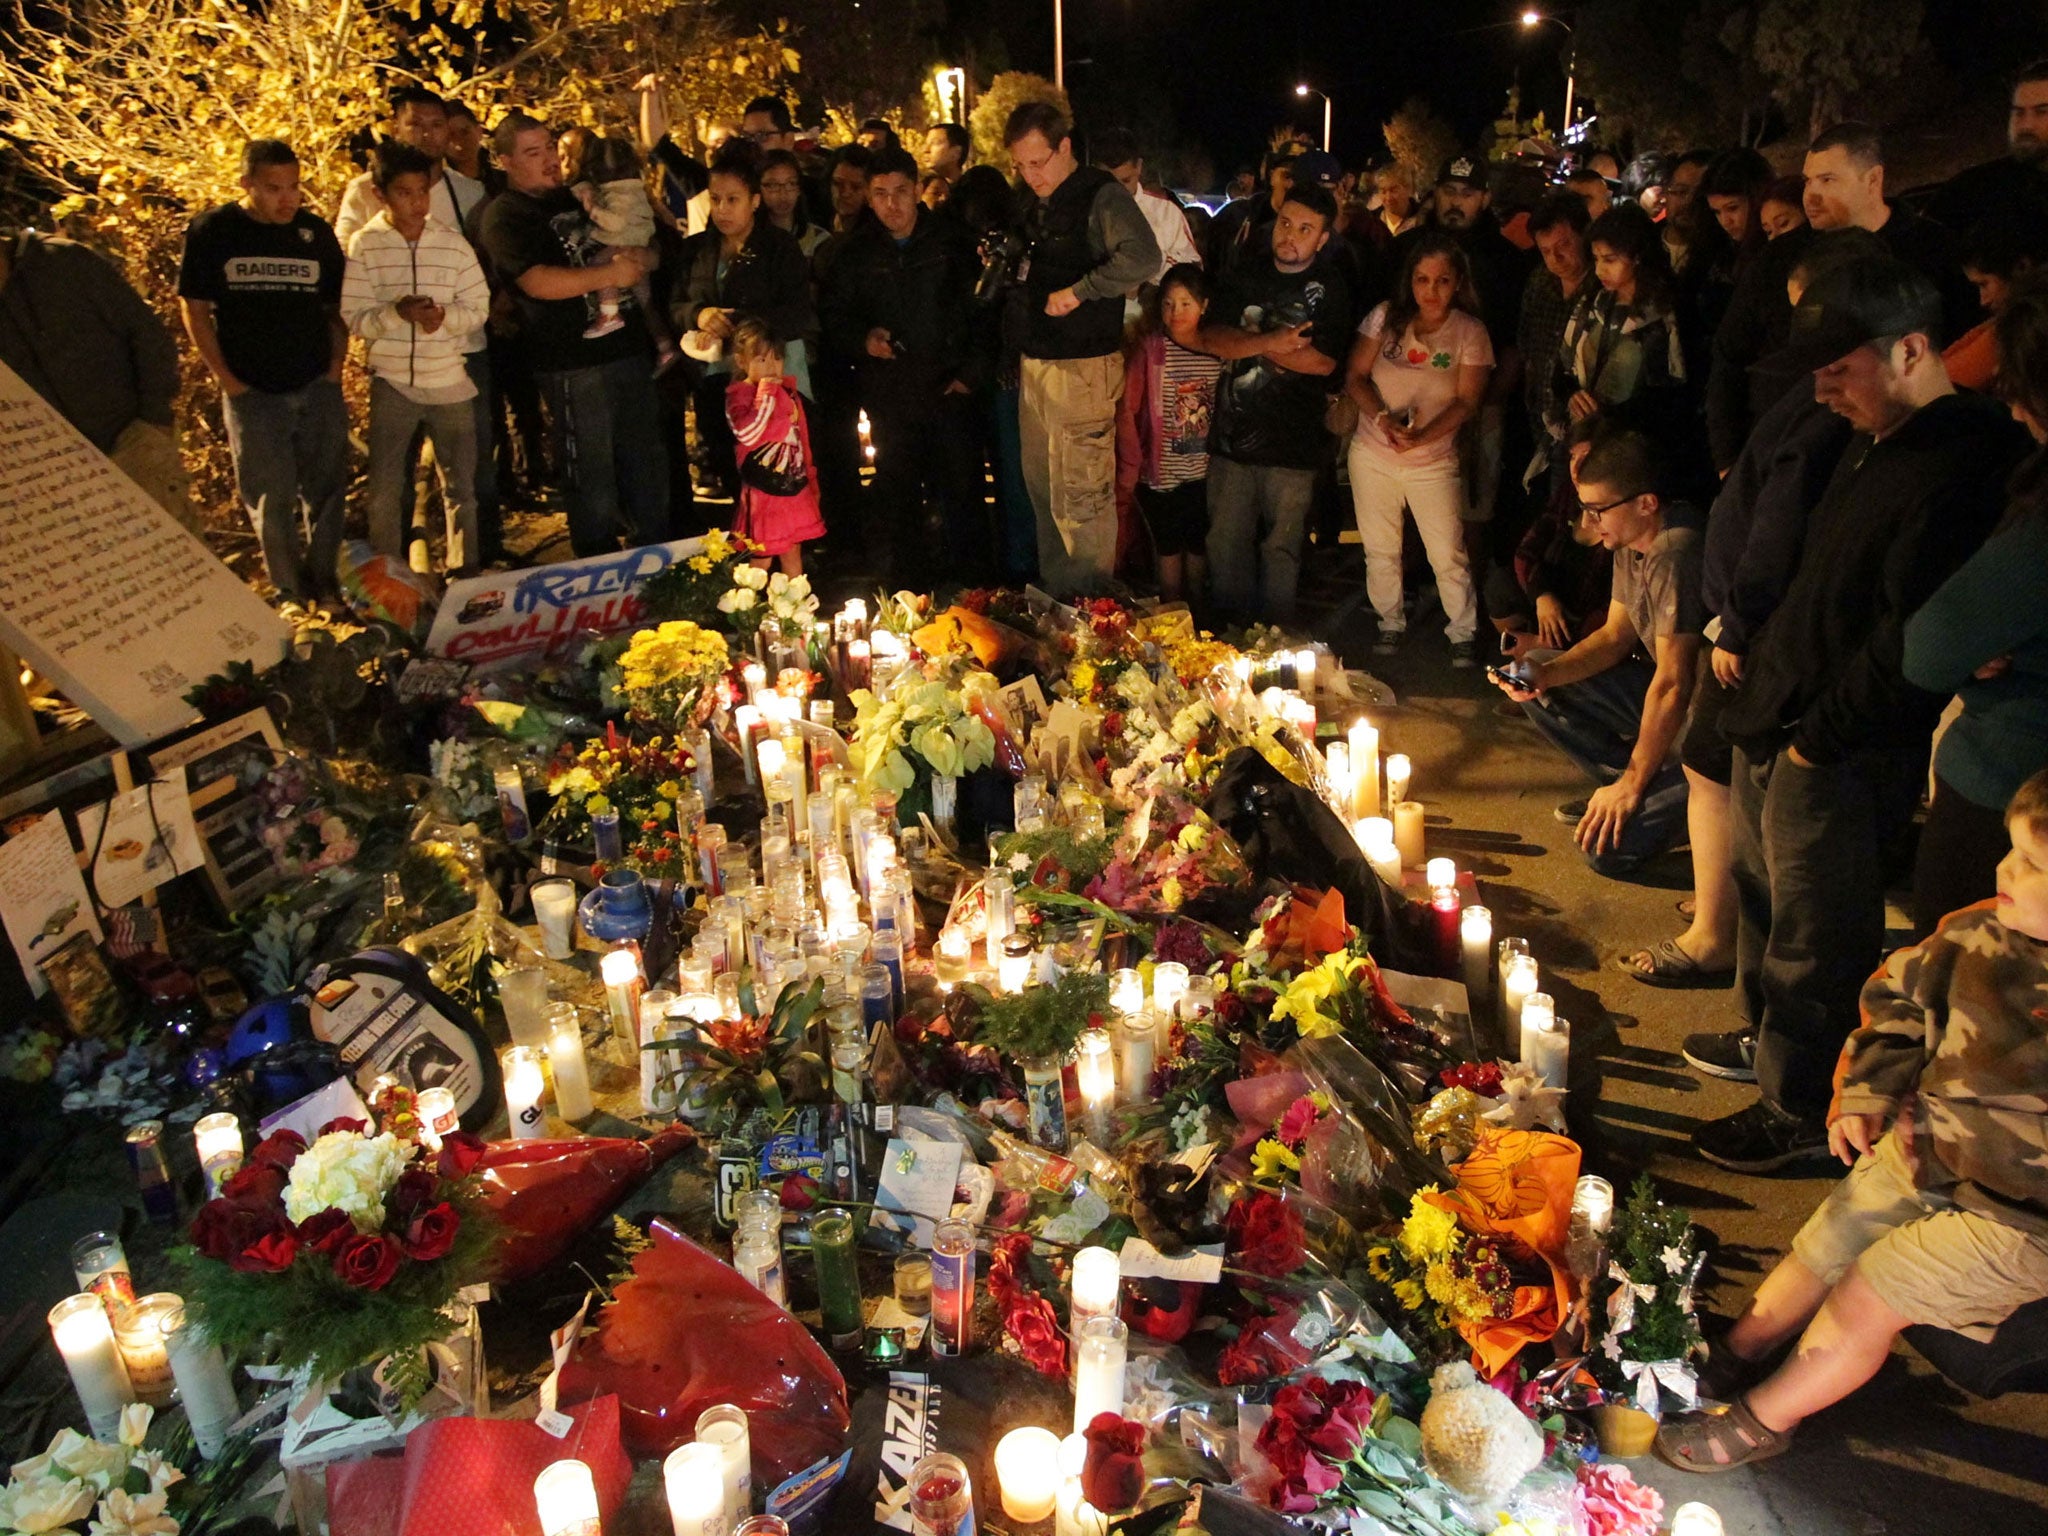 Flowers near the scene of the crash which killed actor Paul Walker and his business partner Roger Rodas